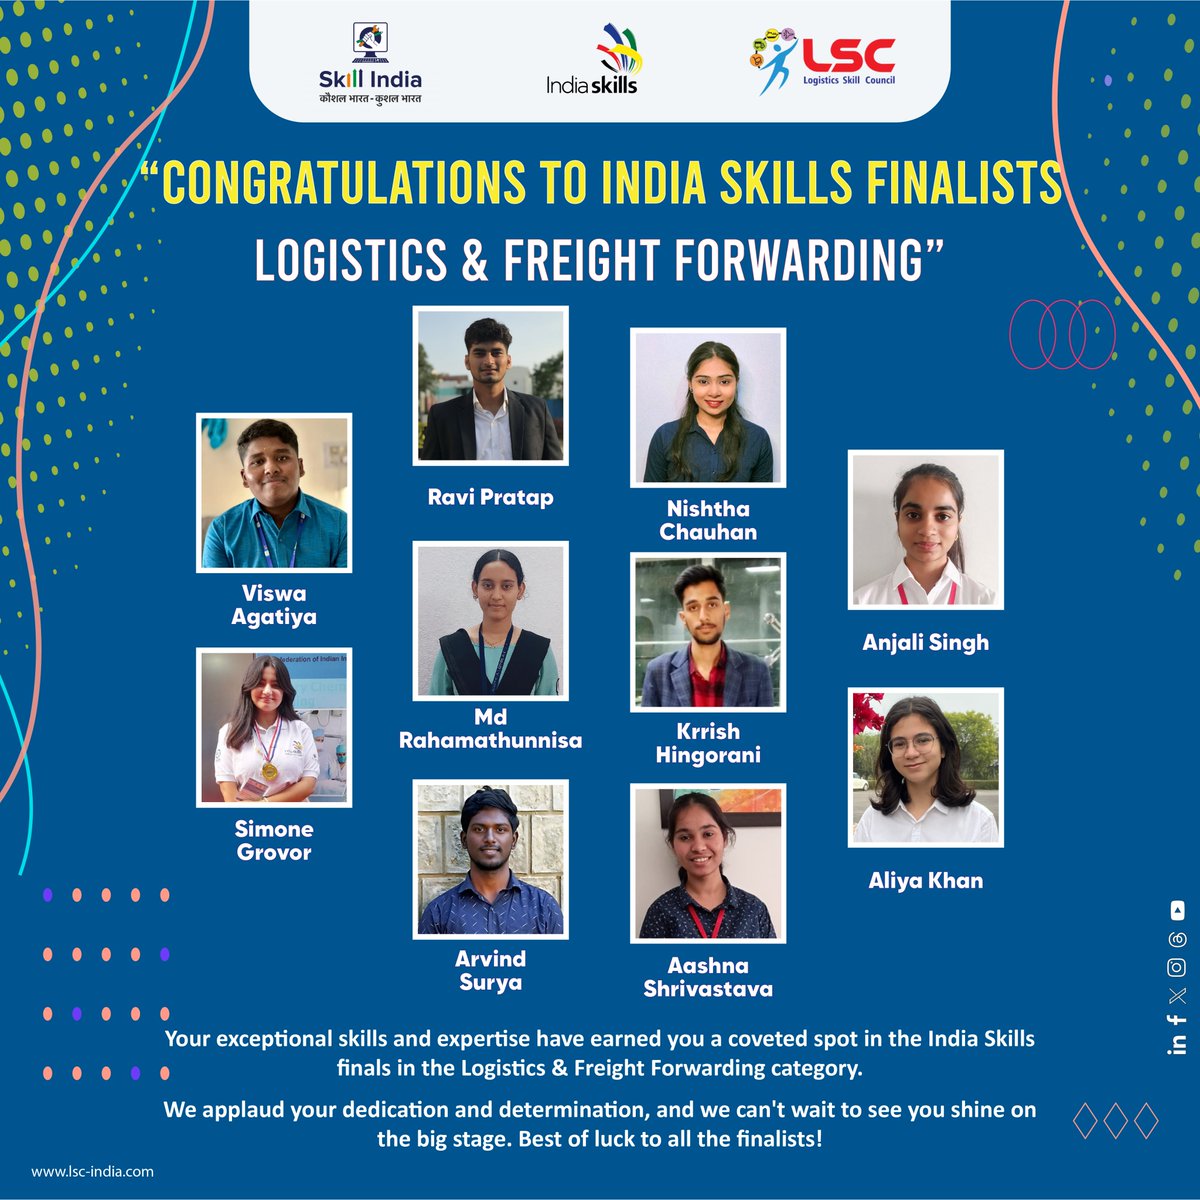 🎉 Congratulations to our outstanding finalists! 

Your exceptional skills and expertise have earned you a coveted spot in the India Skills finals in the Logistics & Freight Forwarding category. 🚚 We applaud your dedication and determination, 
#lsc #logistics #freightforwarding